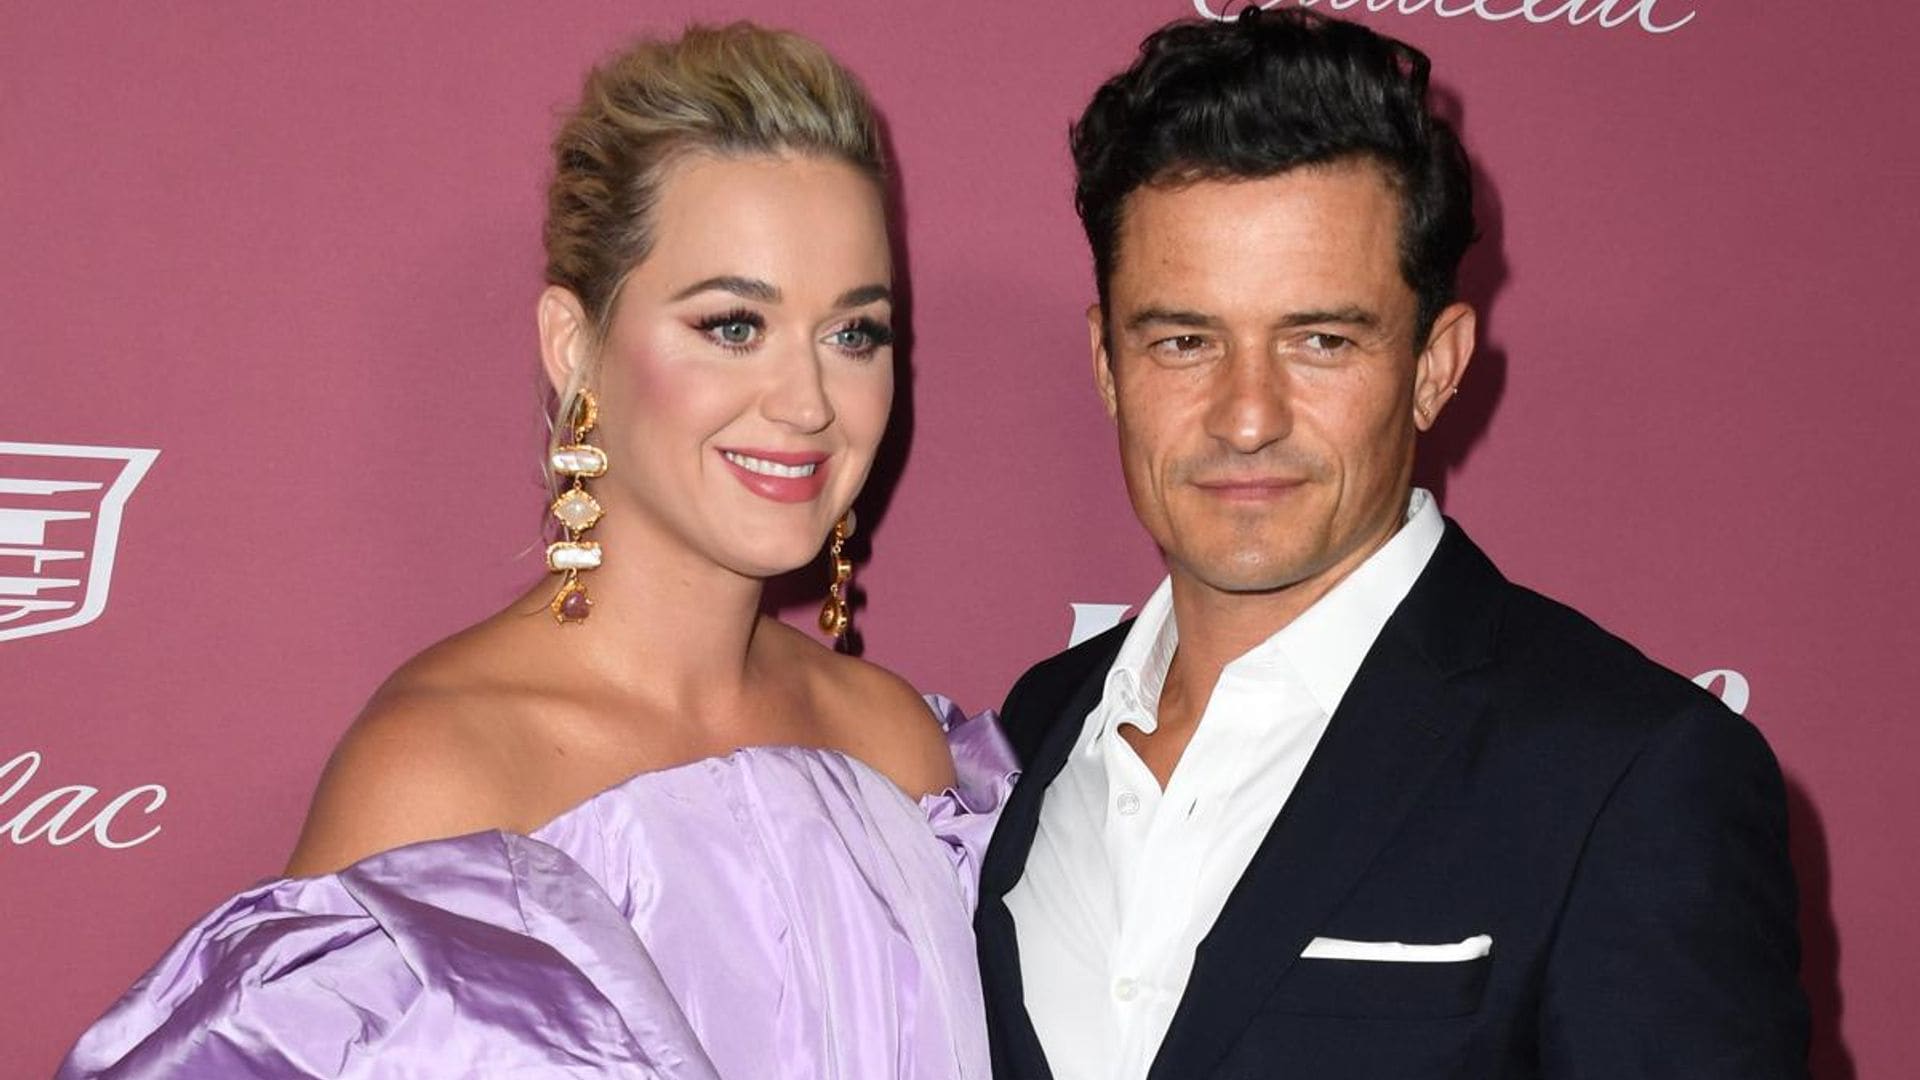 Katy Perry reveals why she’s not ready for another baby with fiancé Orlando Bloom